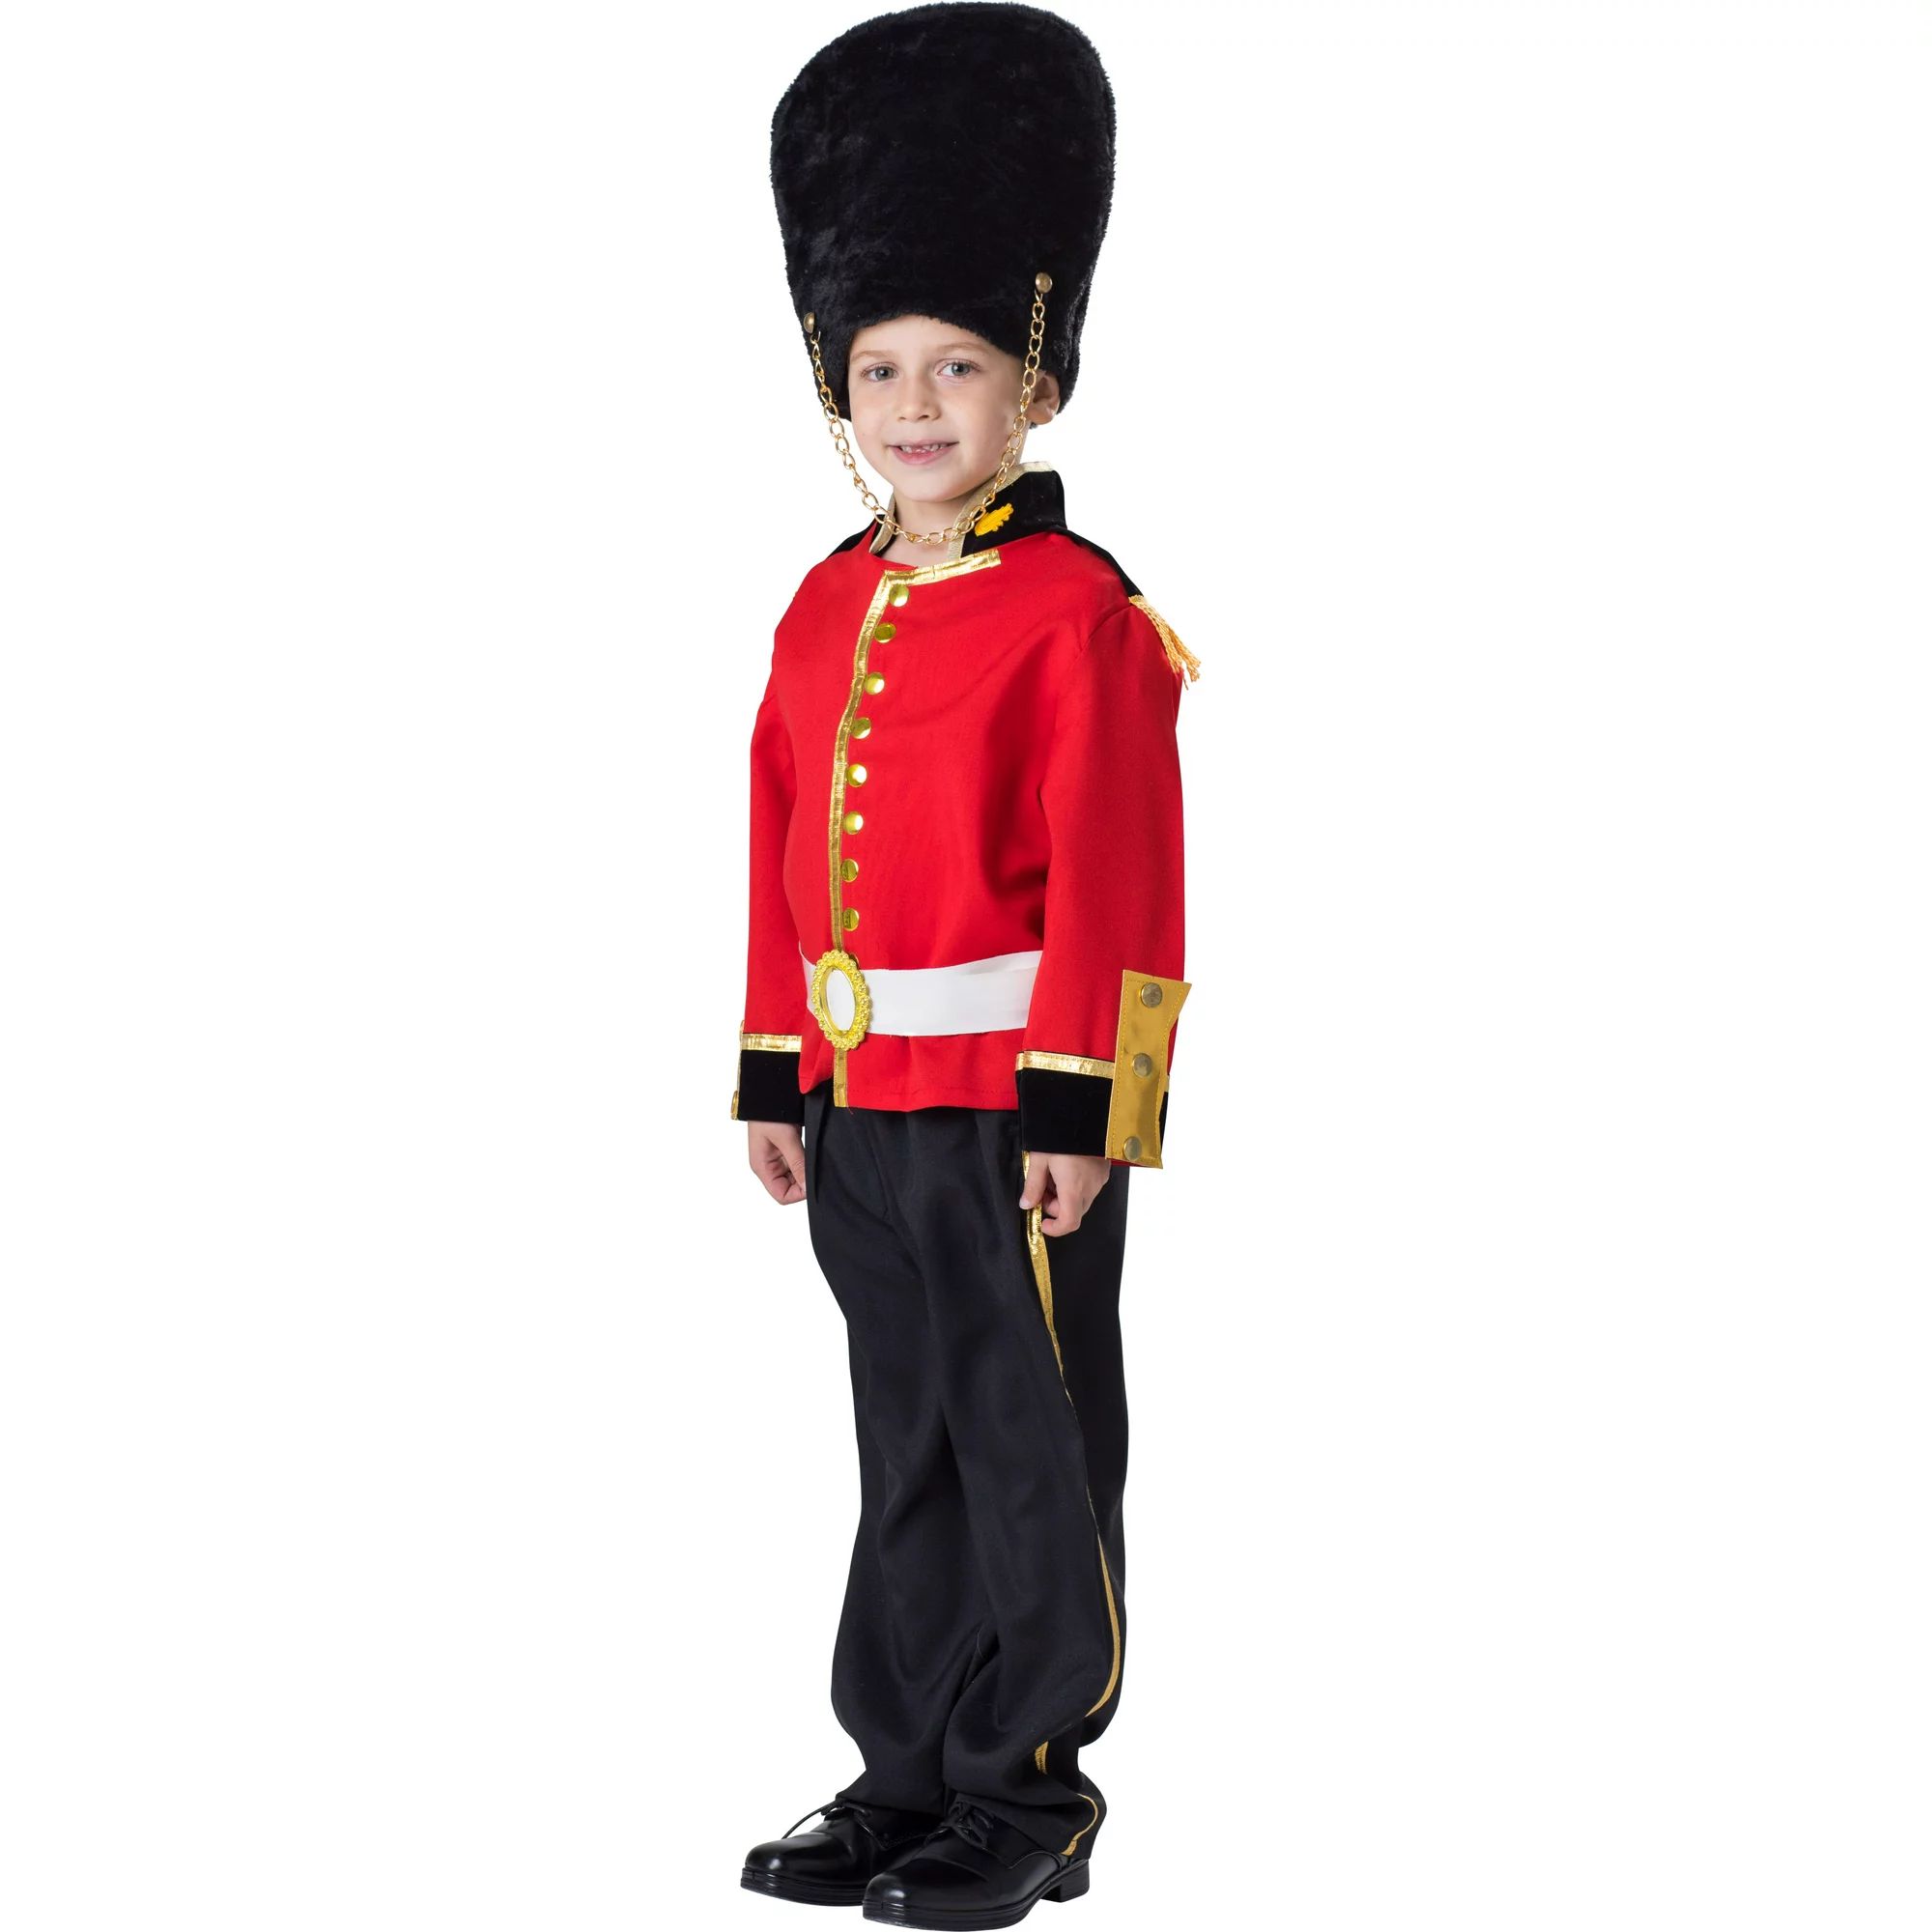 Dress Up America Royal Guard Costume For Kids - Boys Toy Soldier Costume Set | Walmart (US)